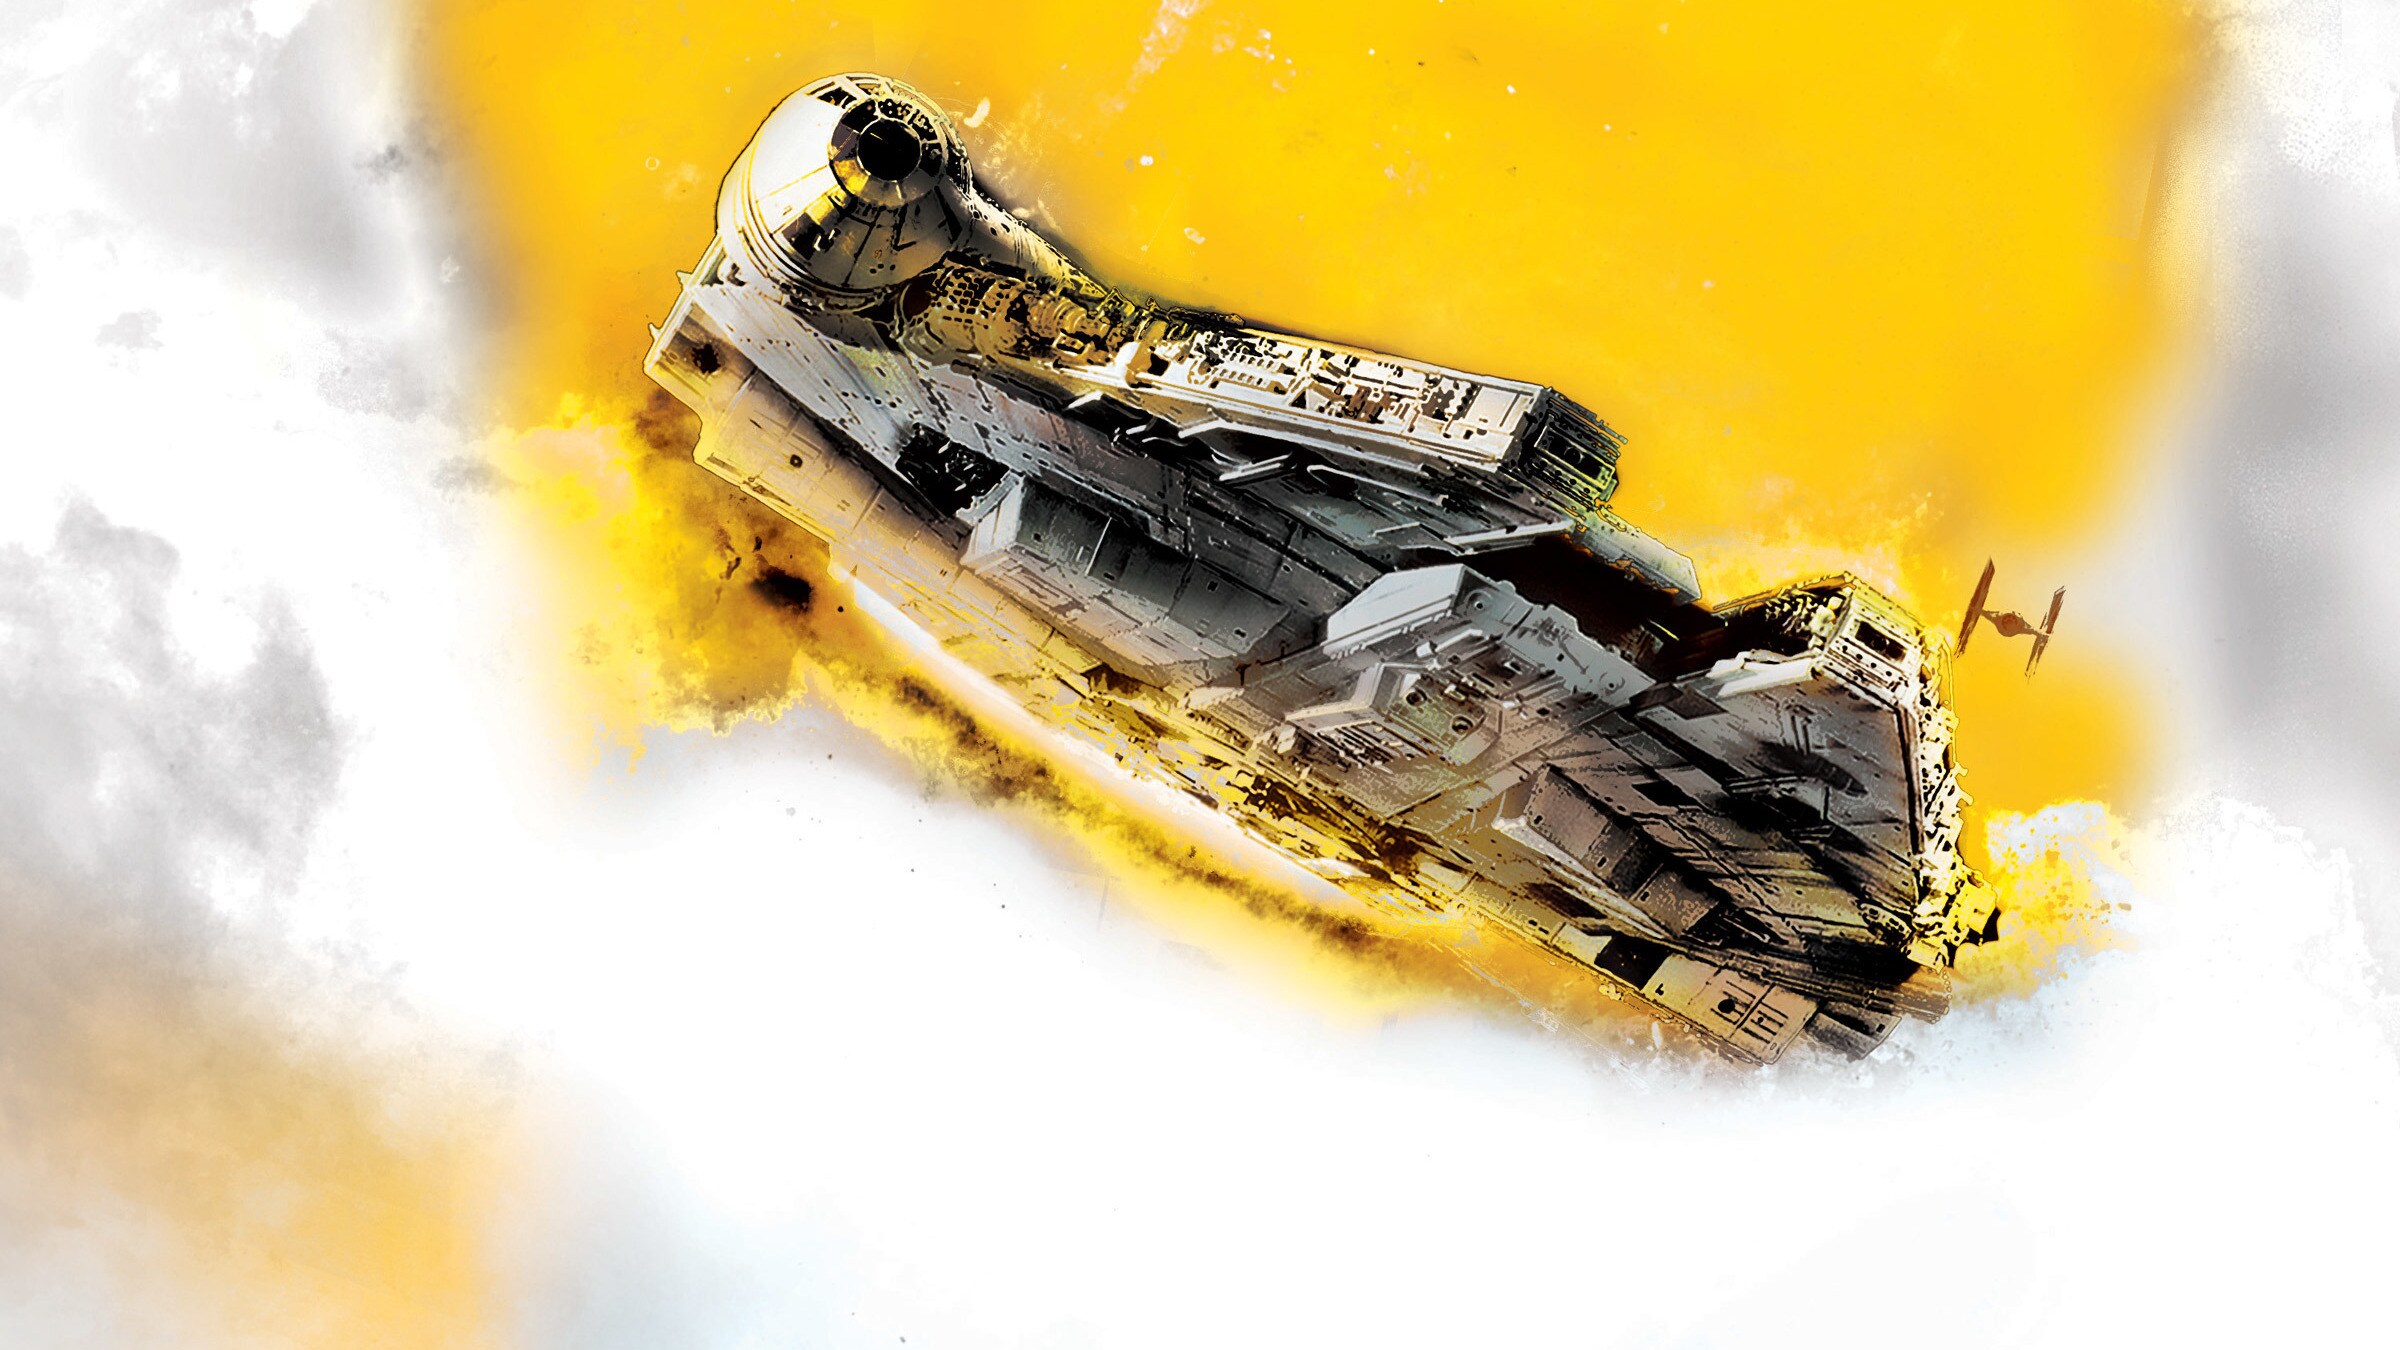 Get a First Look at the Cover of Star Wars: Aftermath - Life Debt